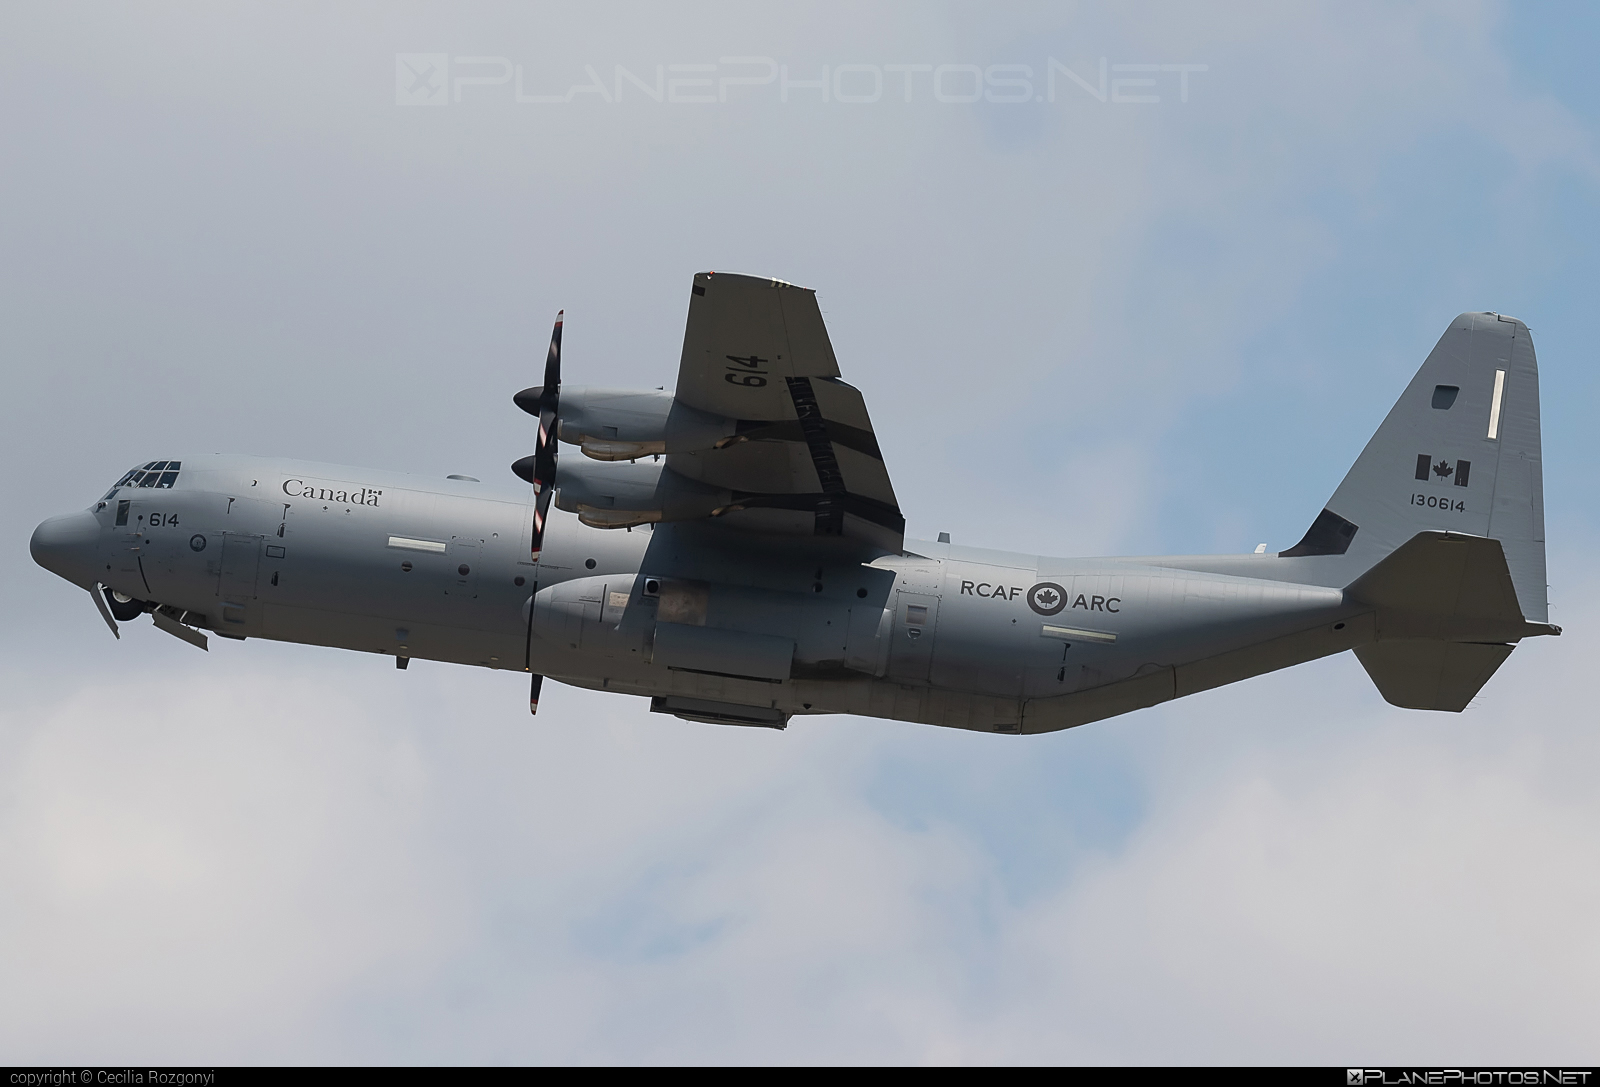 Lockheed Martin CC-130J Hercules - 130614 operated by Royal Canadian Air Force (RCAF) #FerencLisztIntl #c130 #c130hercules #cc130 #cc130hercules #cc130j #cc130jHercules #lockheedMartin #lockheedMartinC130hercules